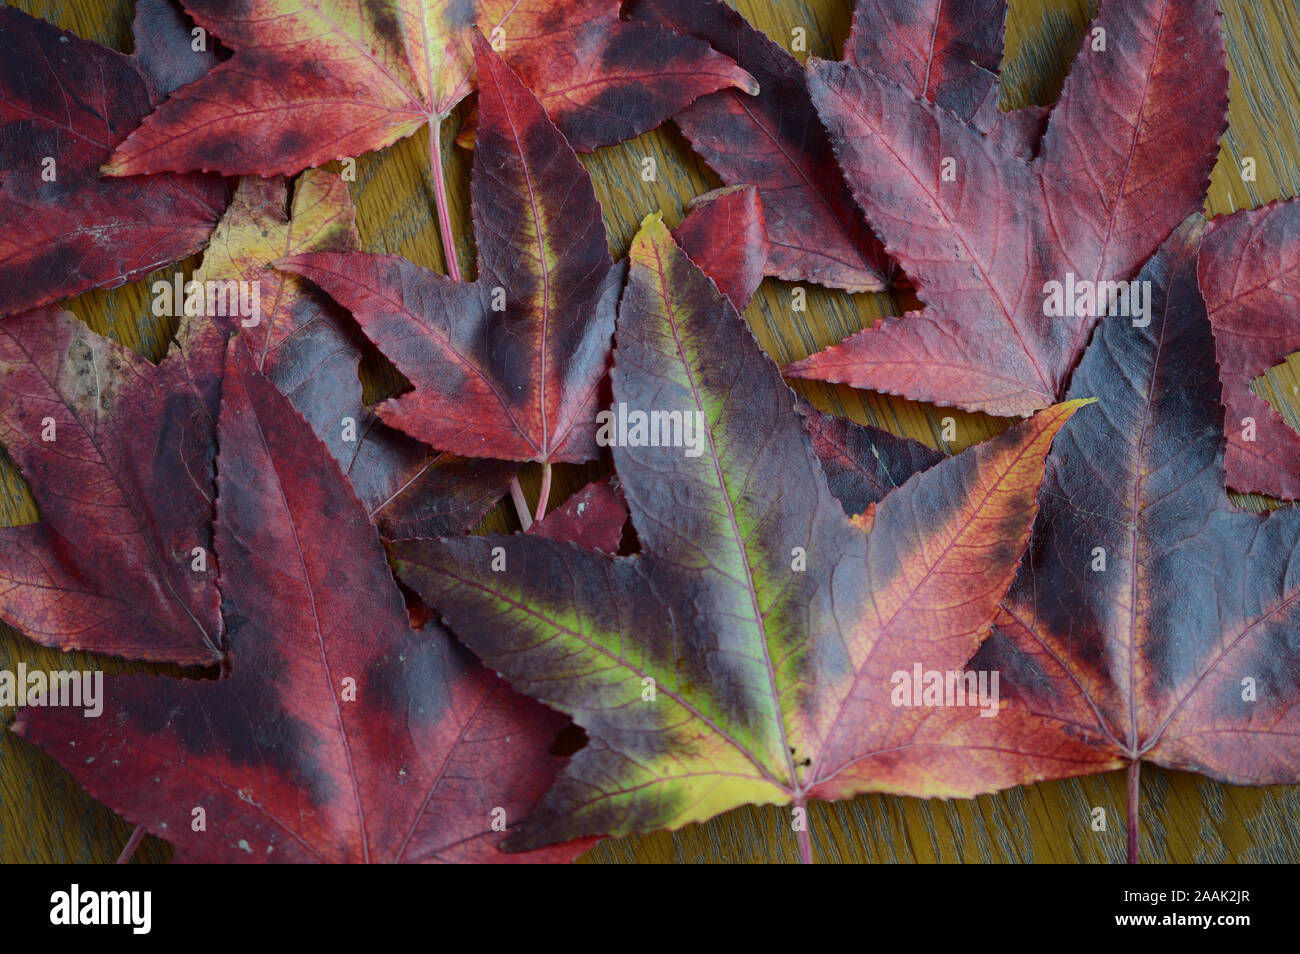 Japanese Maple or Acer japonicum. Closeup of Autumn leaves on a table. Stock Photo